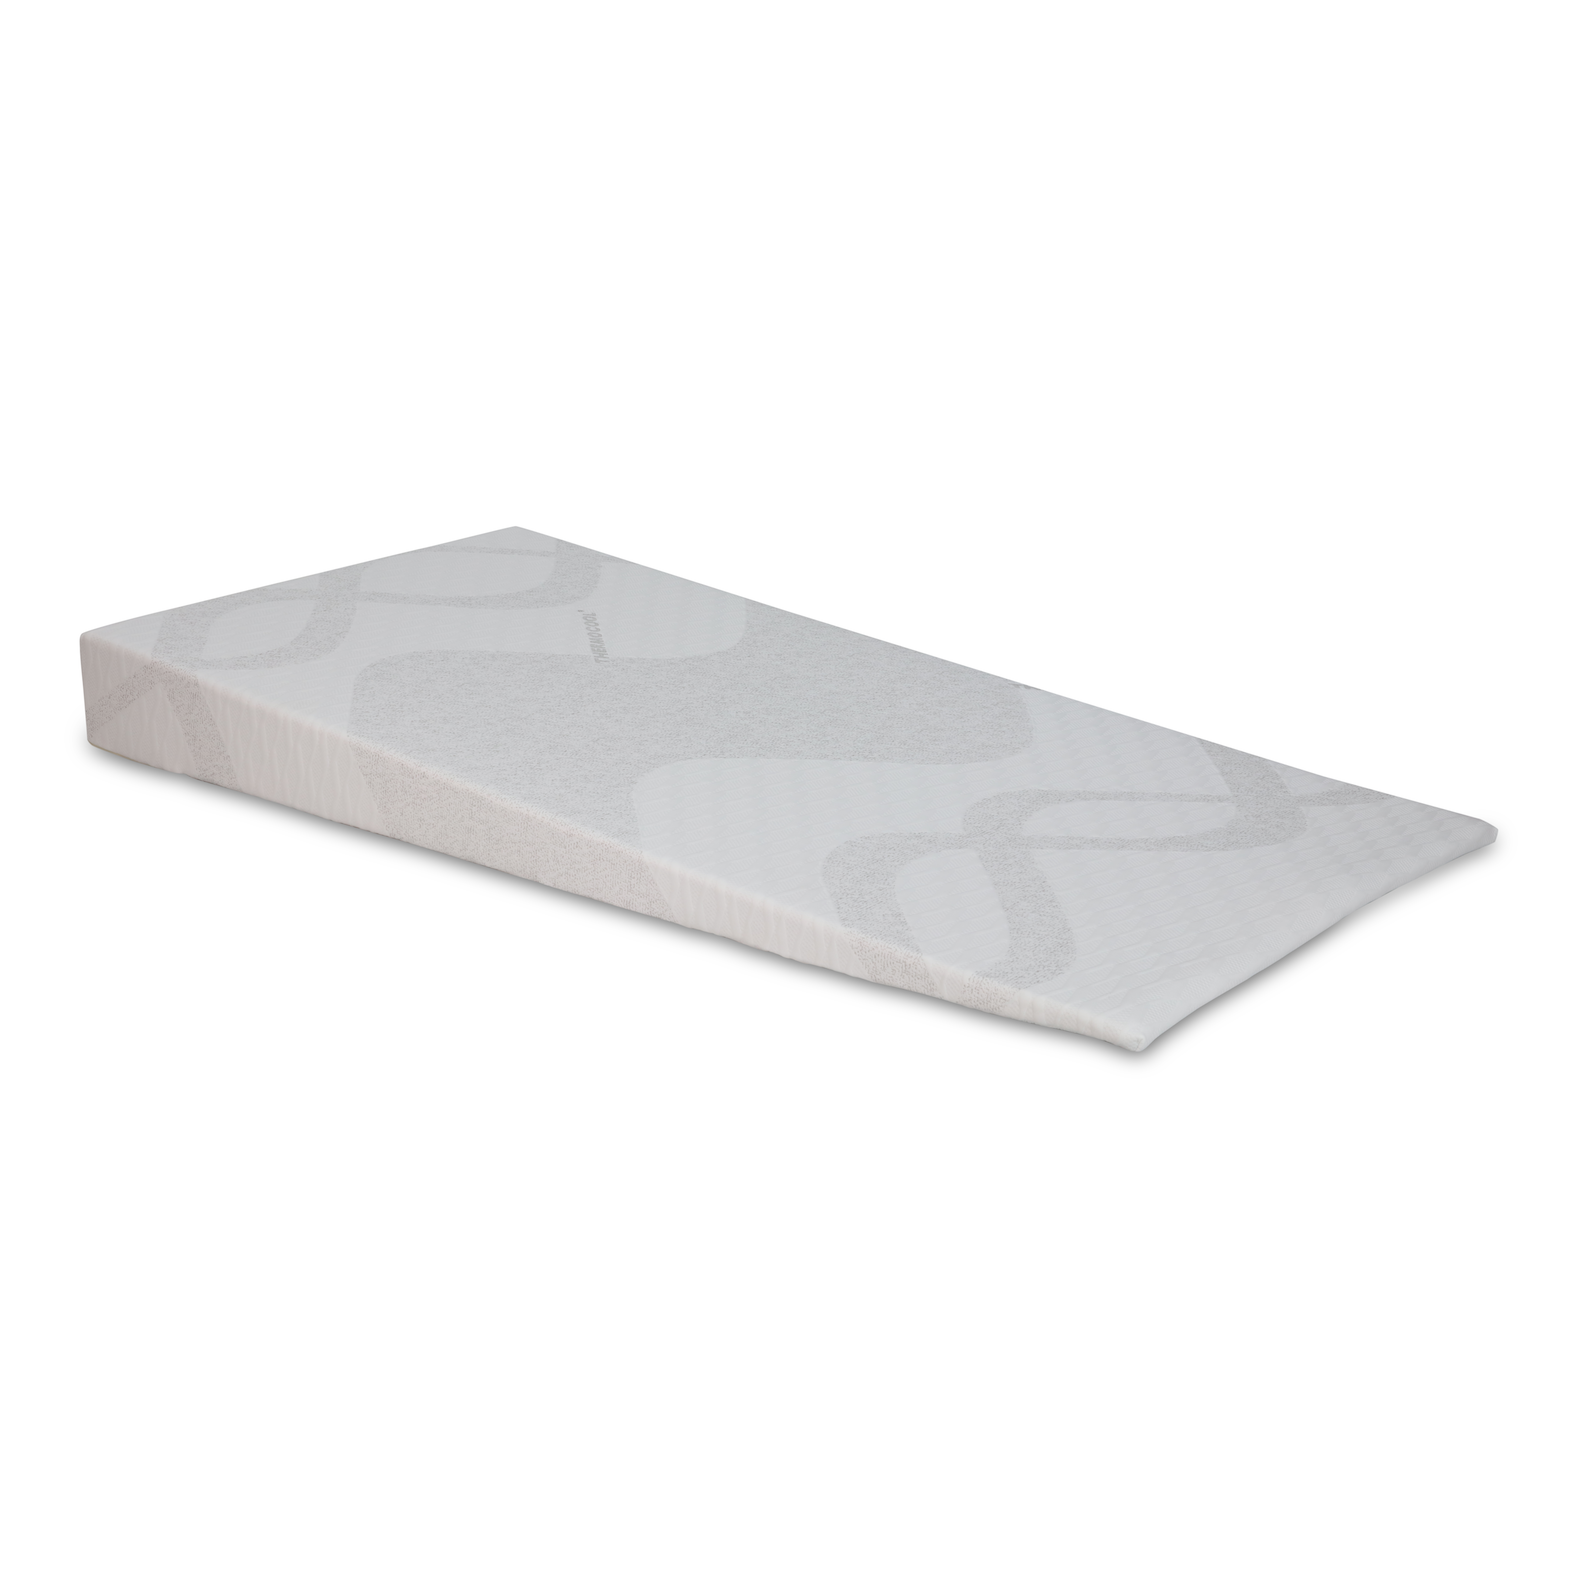 Medical Wedge Mattress for Therapy and Aiding Sleep